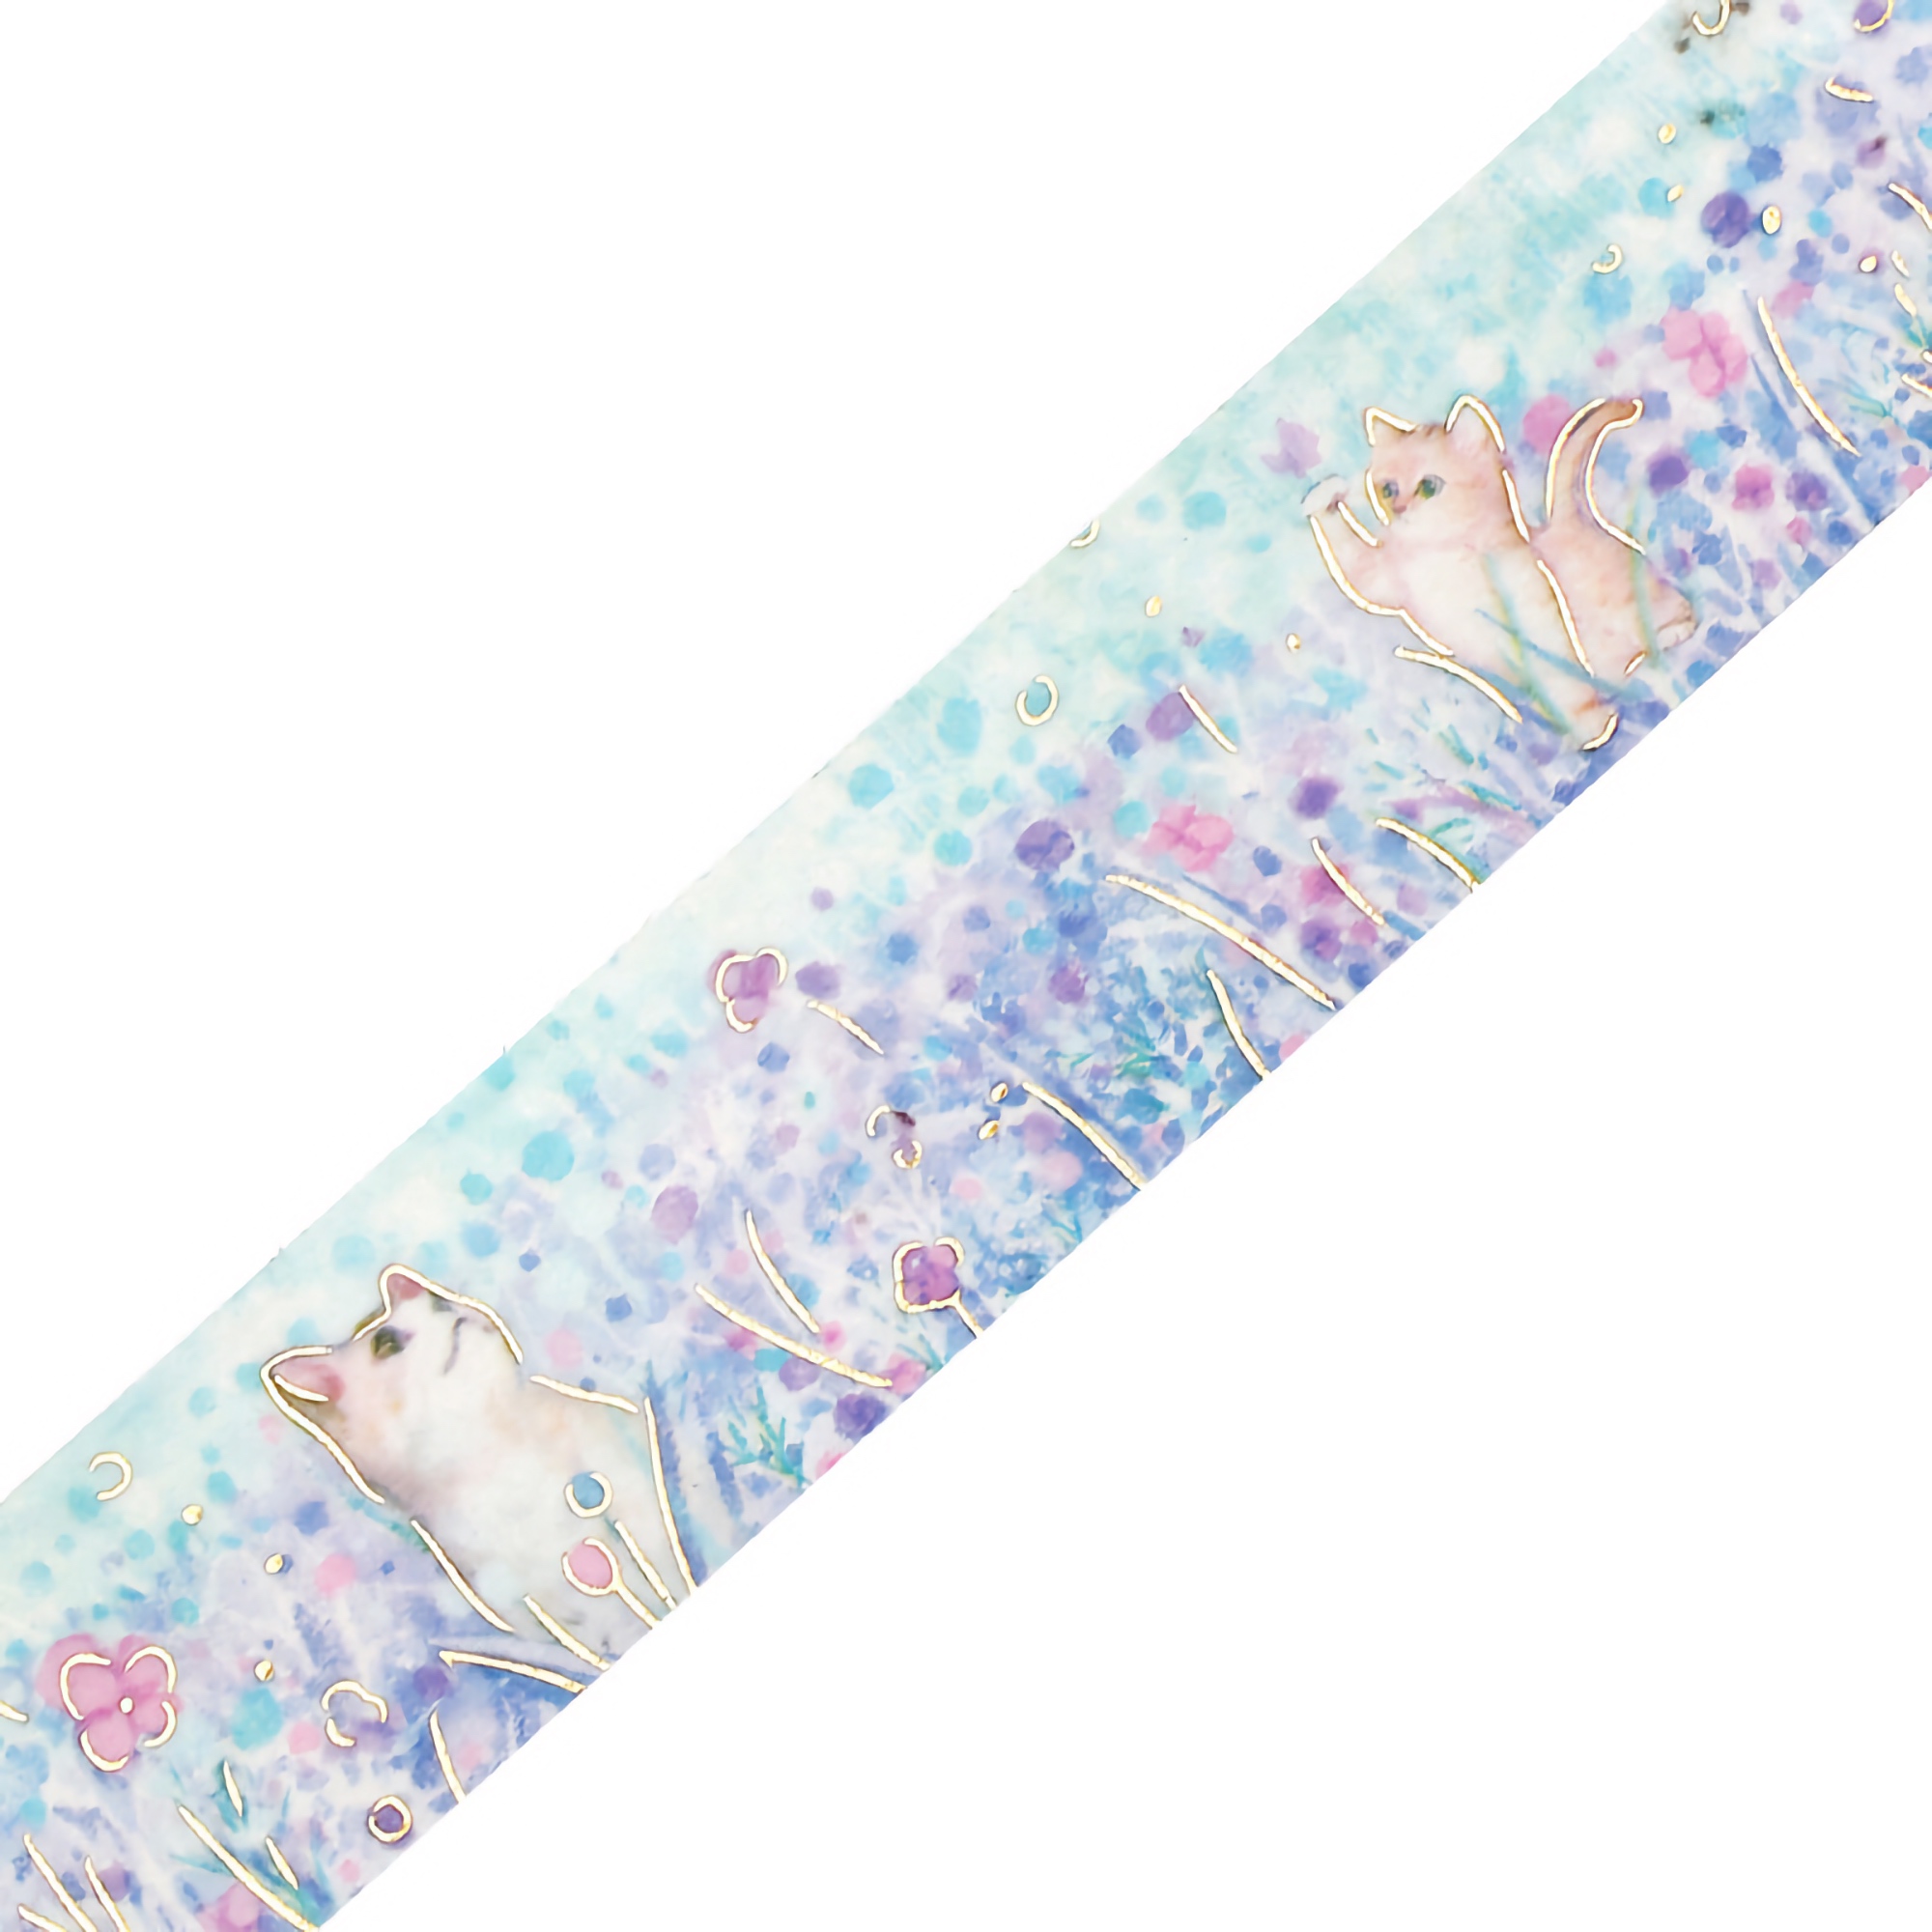 BGM Washi Tape Special Foil Flowers and Cats / Small Friends 20 mm